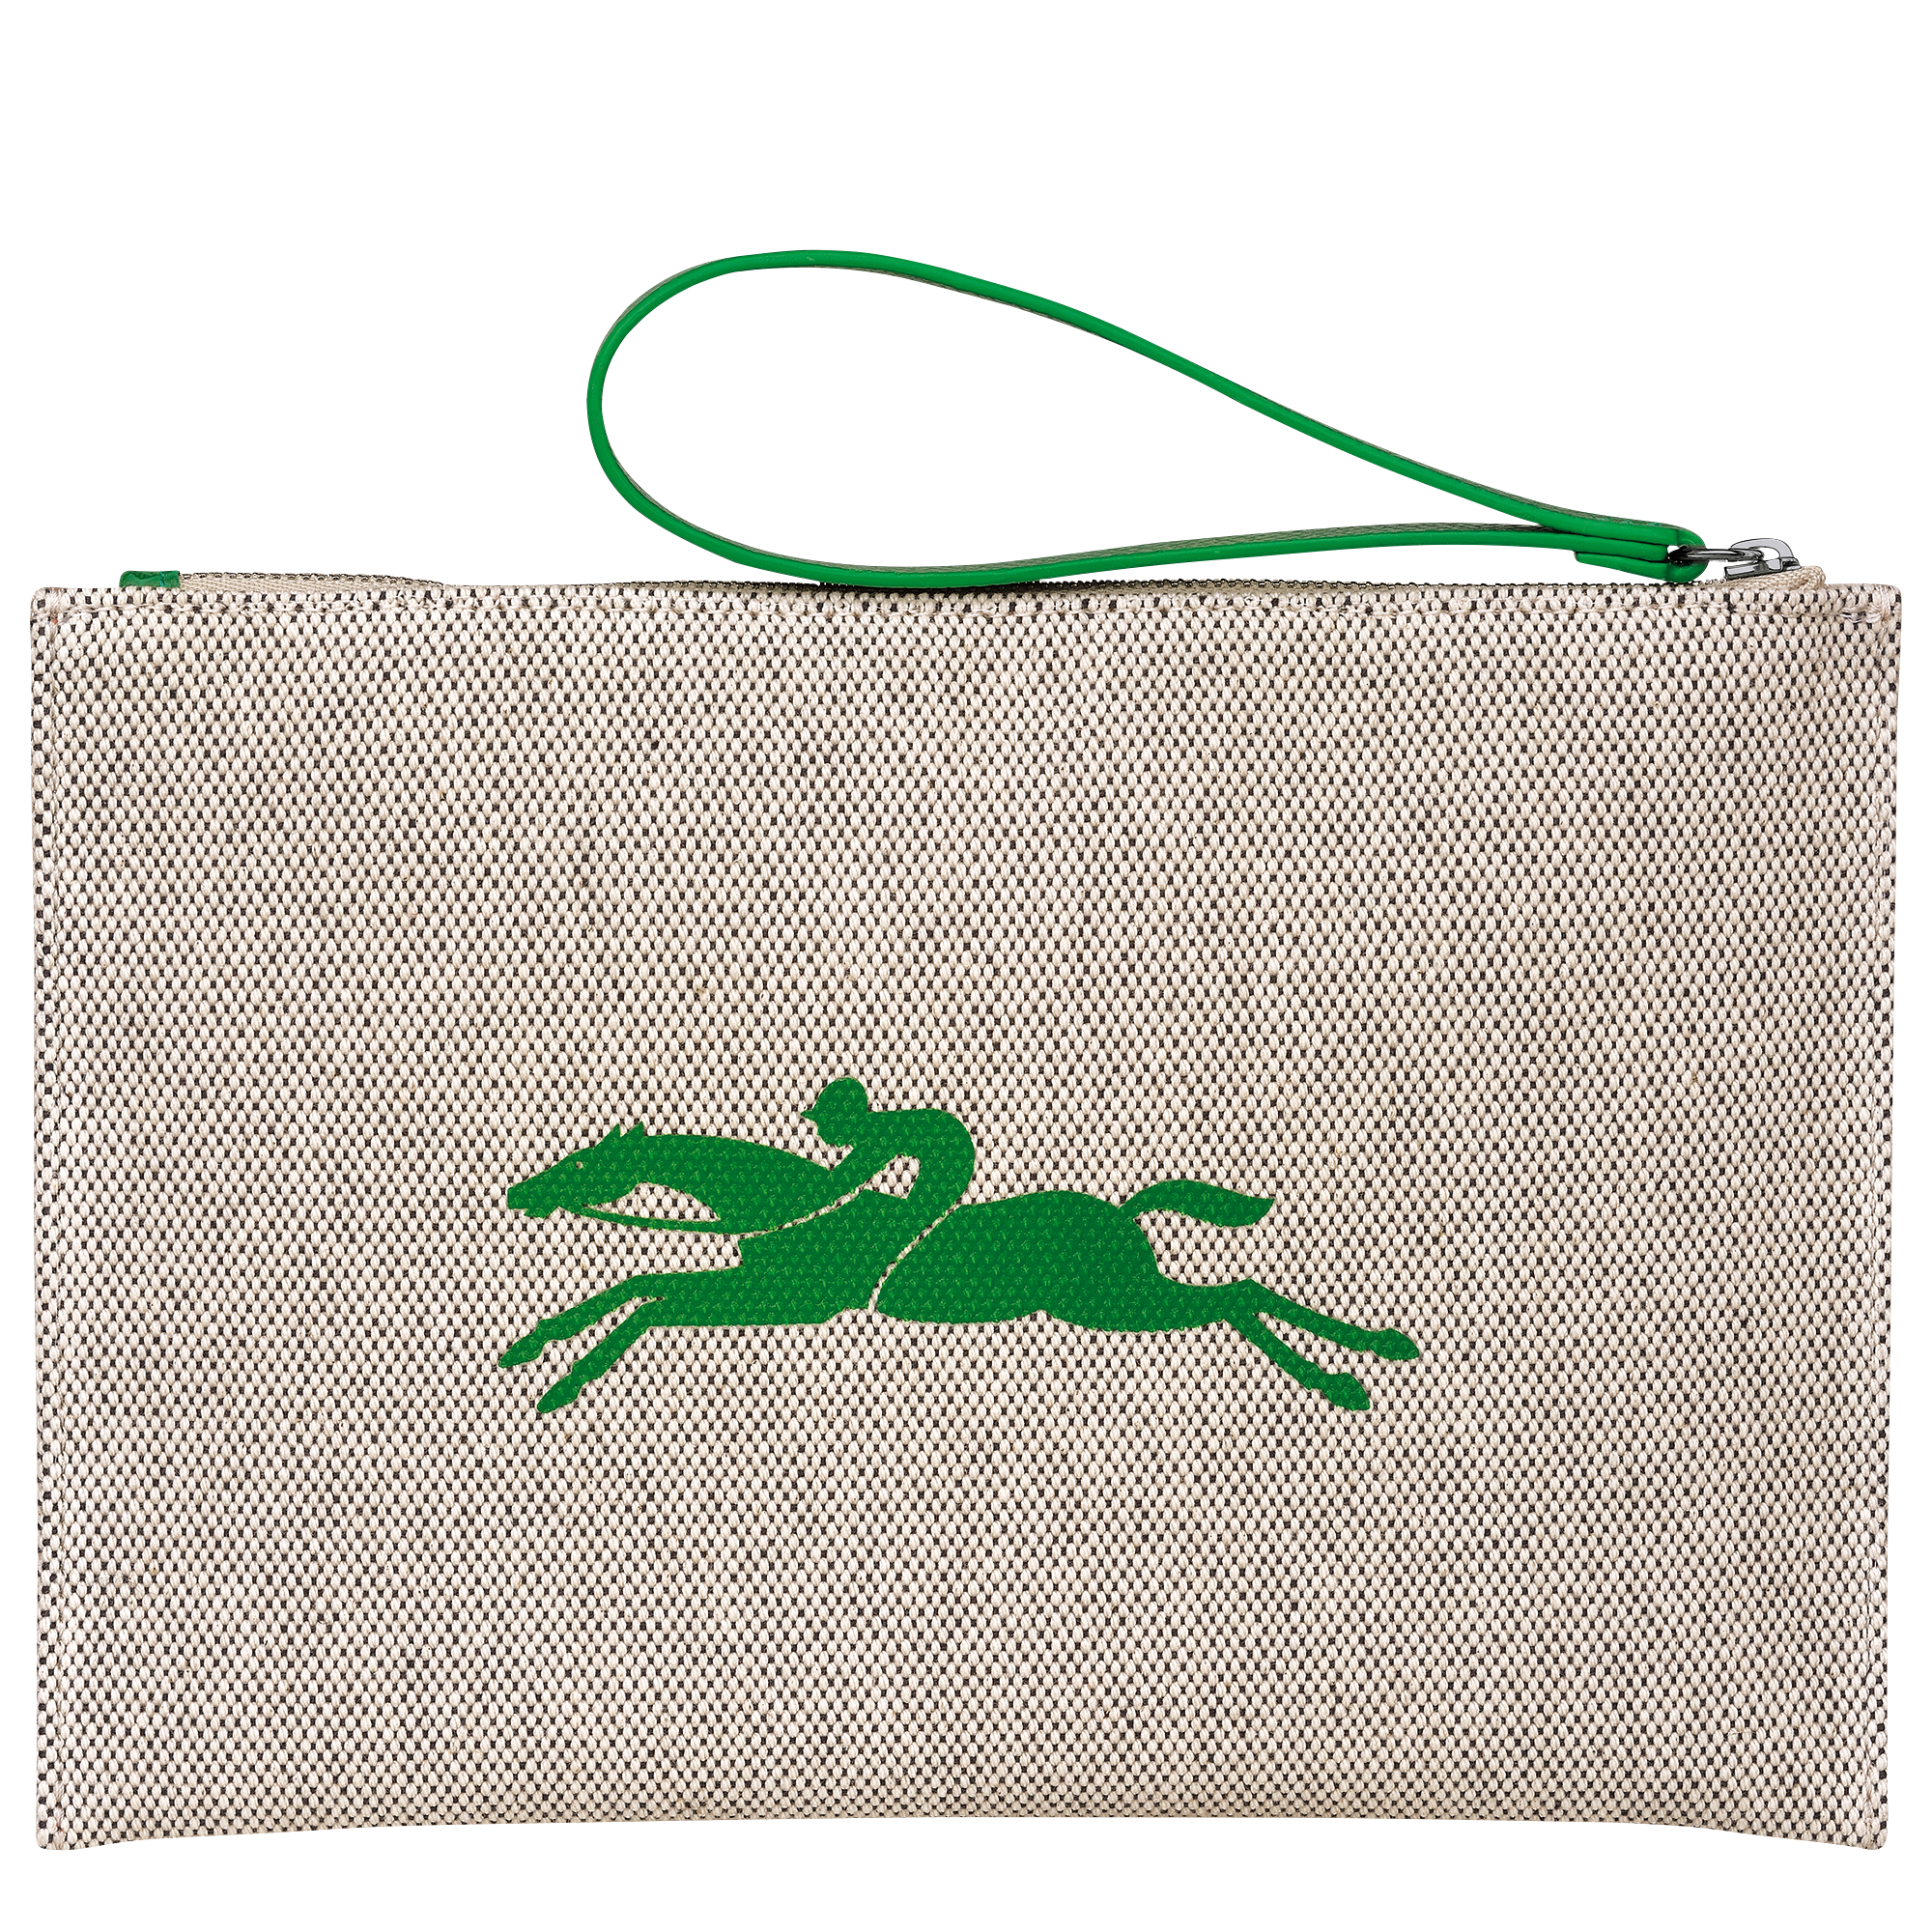 Essential Pouch, Green